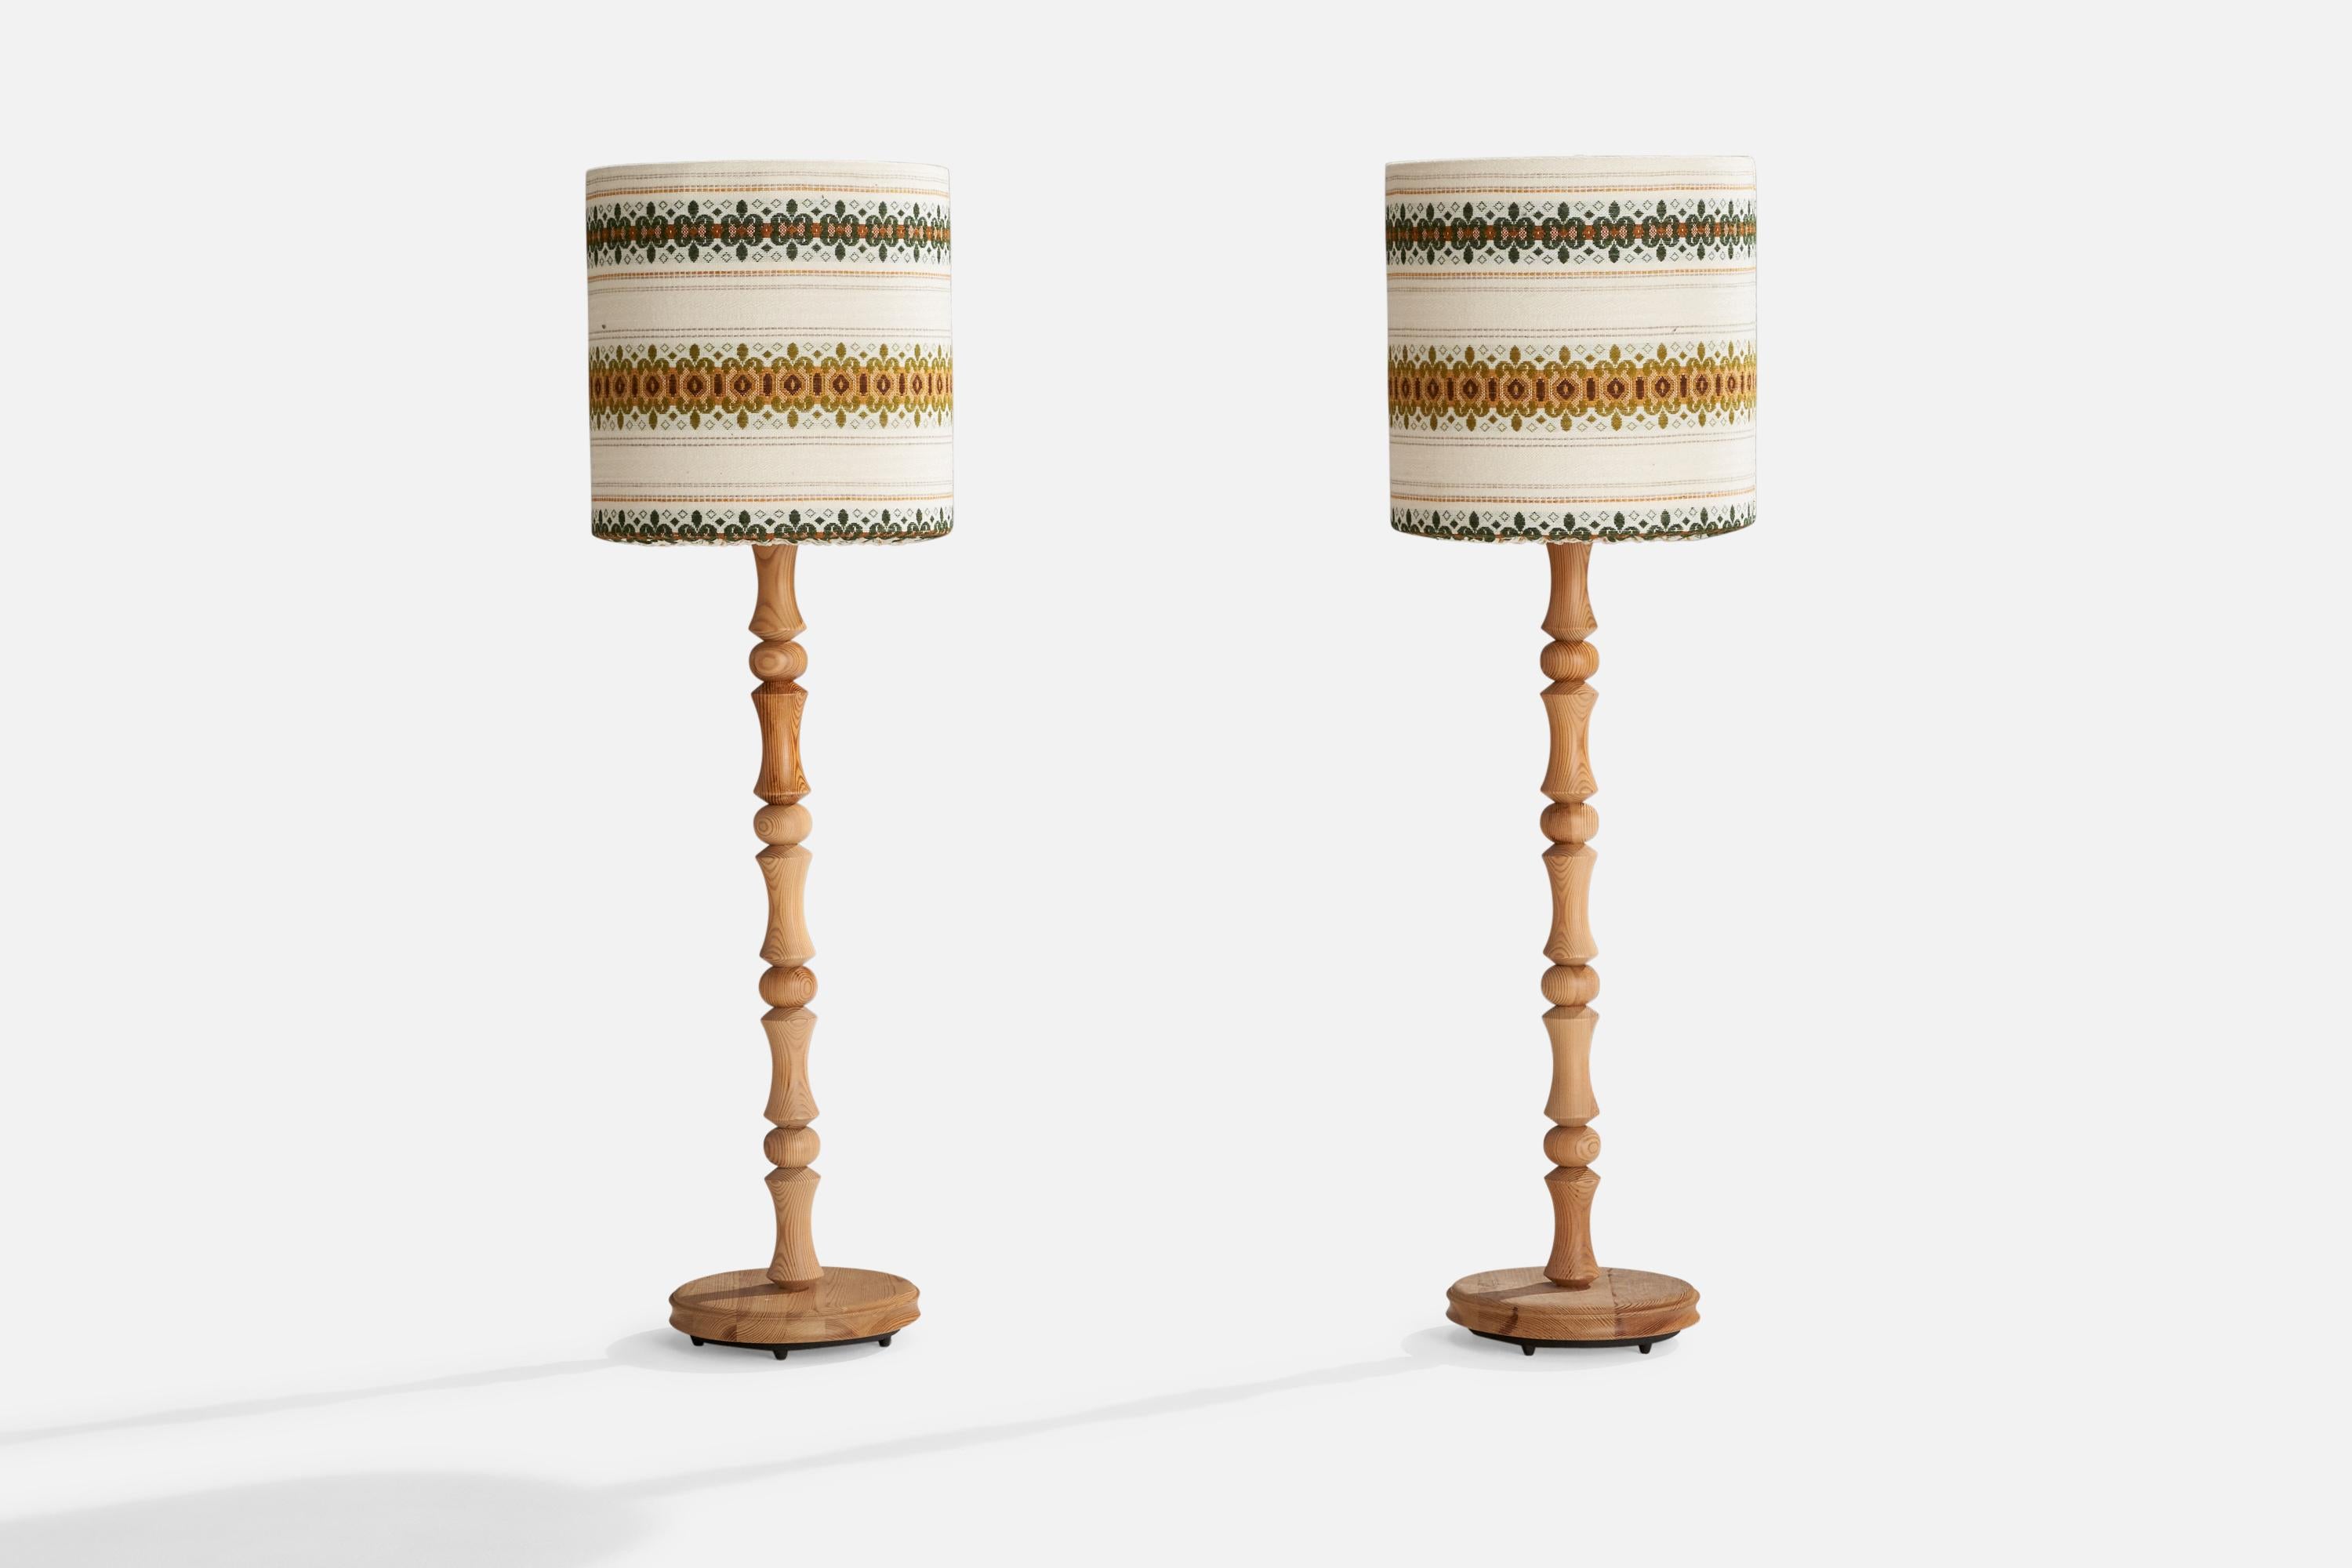 A pair of small pine and woven off-white, yellow and green fabric floor lamps designed and produced in Sweden, 1970s.﻿

Overall Dimensions (inches):46” H x 13.625” W x16.5” D
Stated dimensions include shade.
Bulb Specifications: E-26 Bulb
Number of